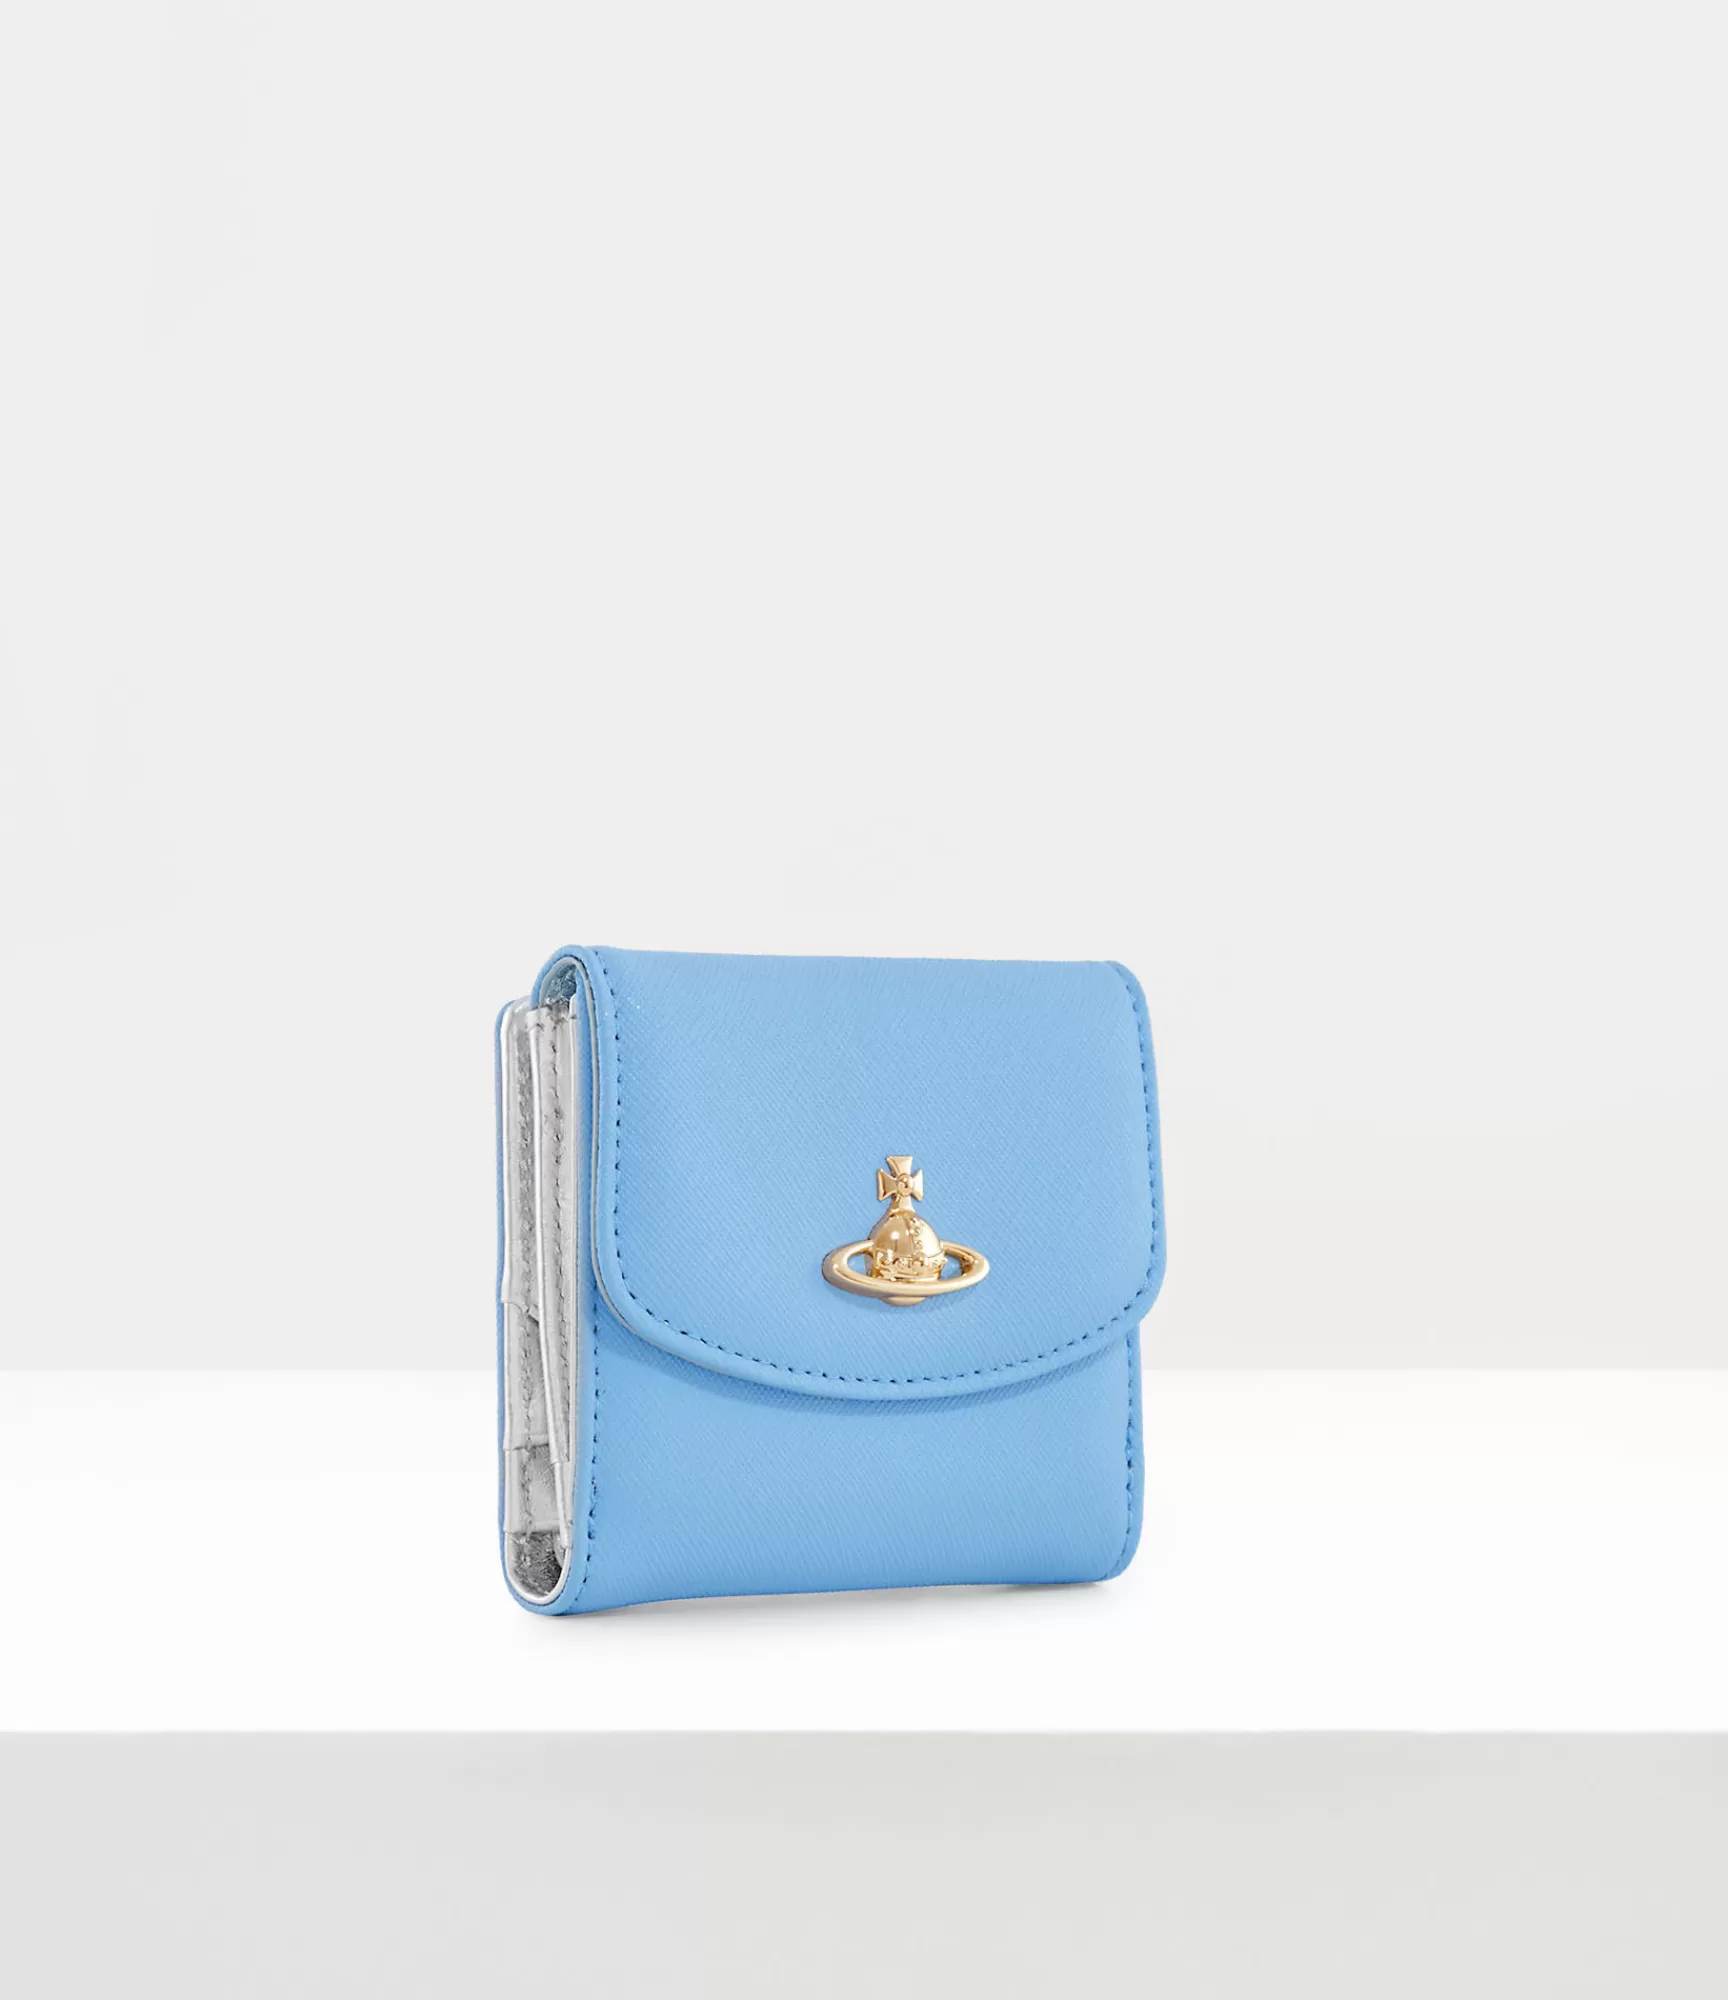 Vivienne Westwood Wallets and Purses*Saffiano small wallet Light Blue